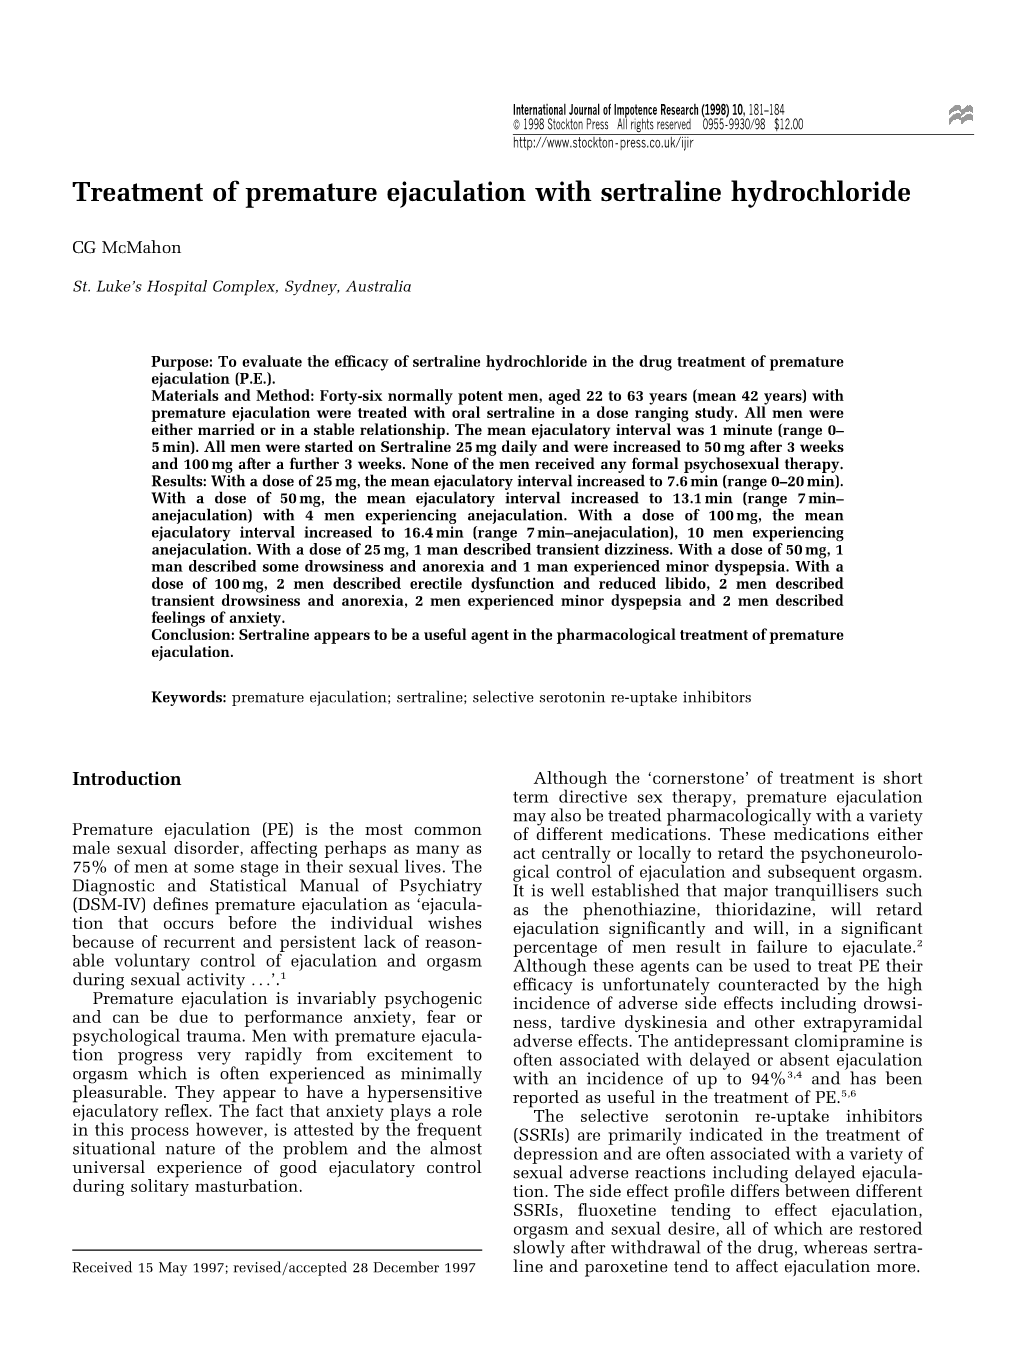 Treatment of Premature Ejaculation with Sertraline Hydrochloride